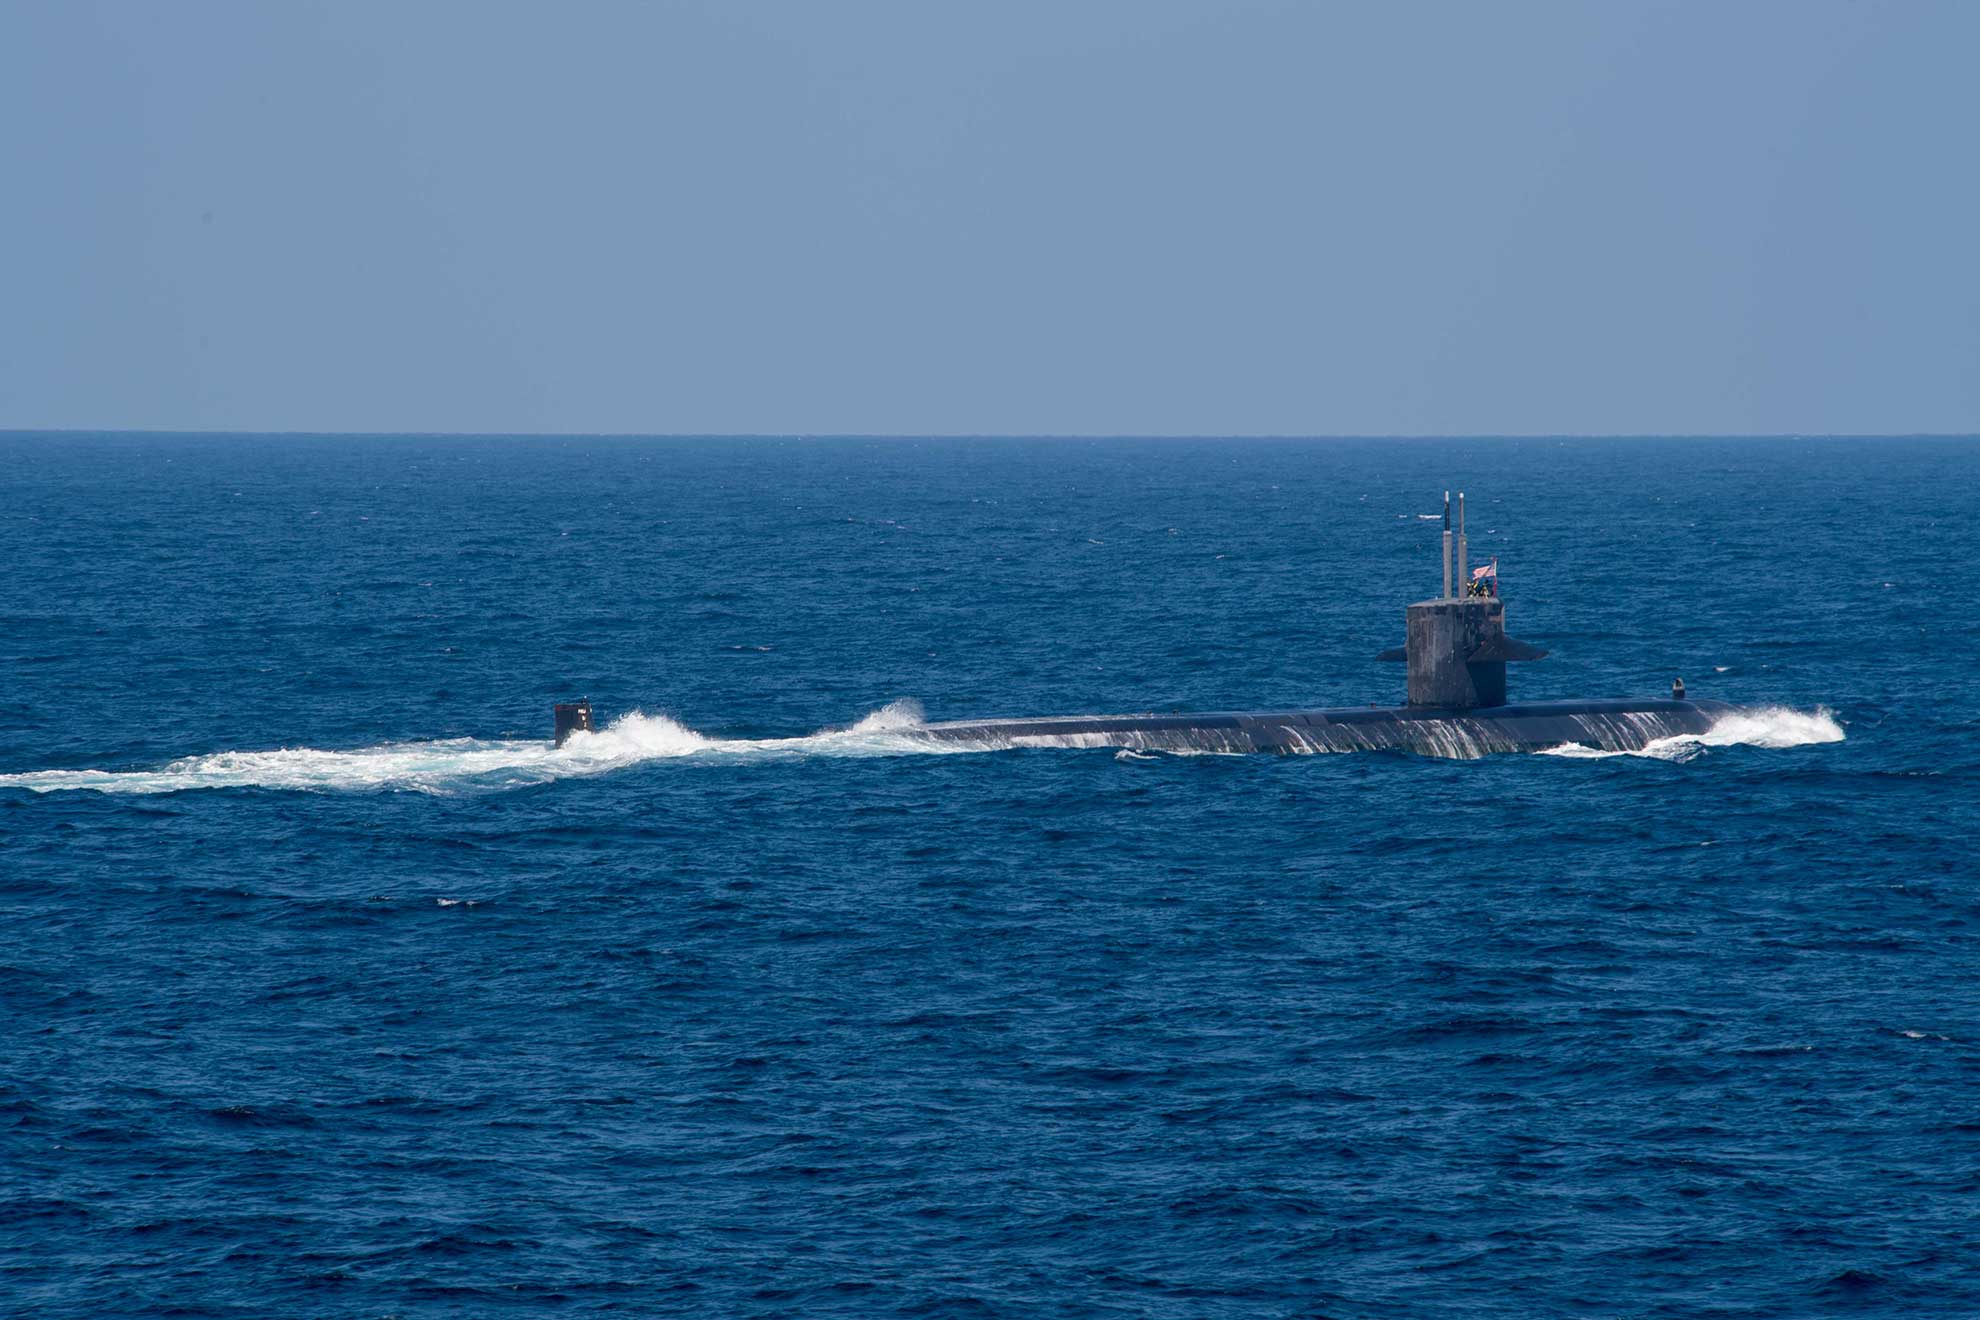 Arabian Sea (Dec. 18, 2018) The fast attack submarine USS Louisville (SSN 724) surfaces during the anti-submarine warfare exercise SHAREM 195 in the Arabian Sea, Dec. 18, 2018 -- U.S. Navy photo by MCS2 Abigayle Lutz. -